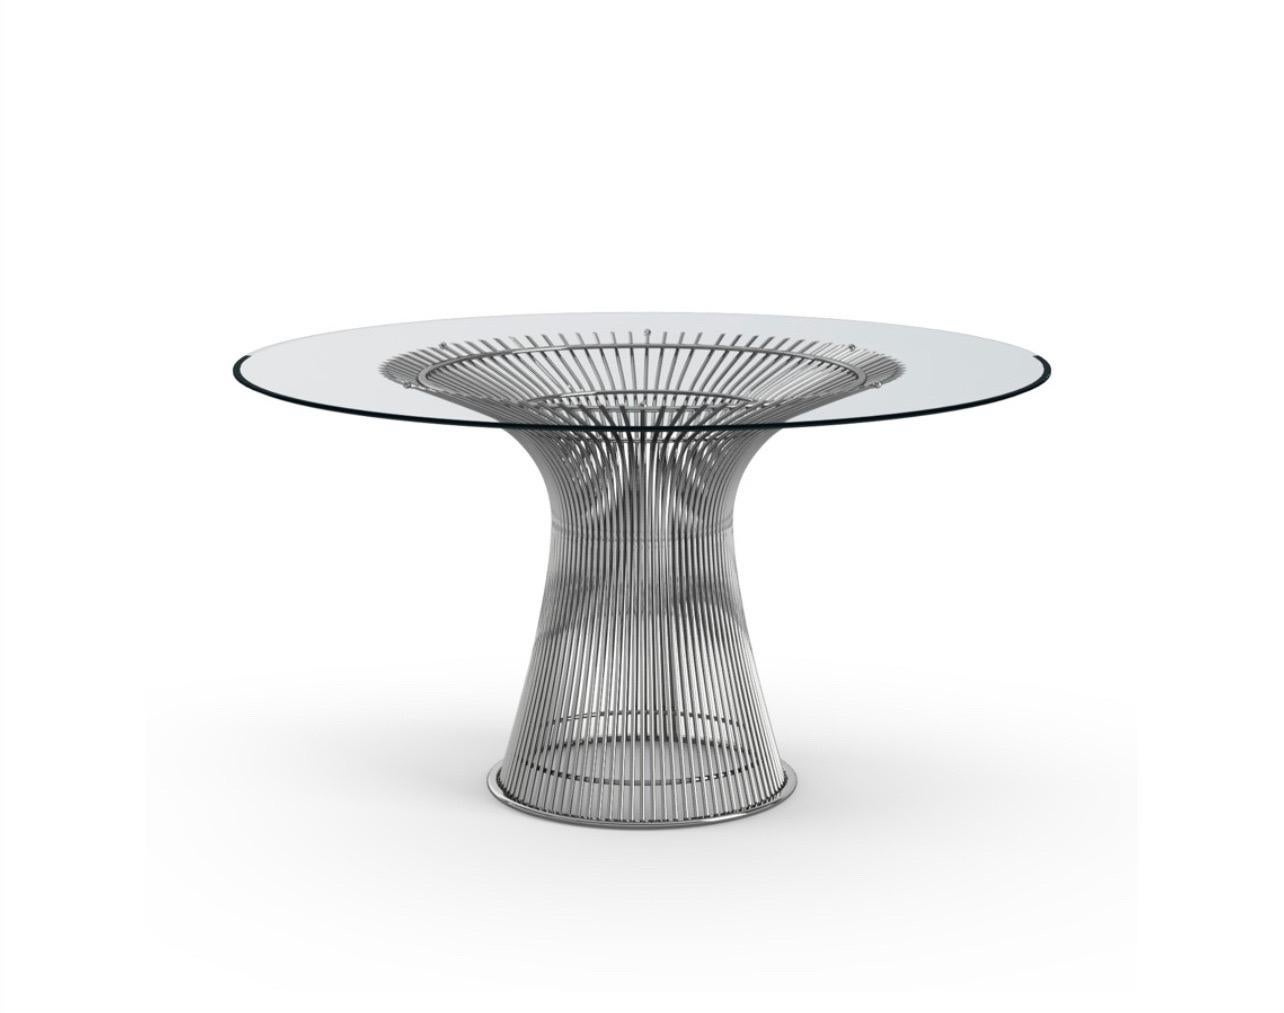 A classic warren Platner dining table, circa 1980's nickel plated base with beveled glass top nice clean condition.